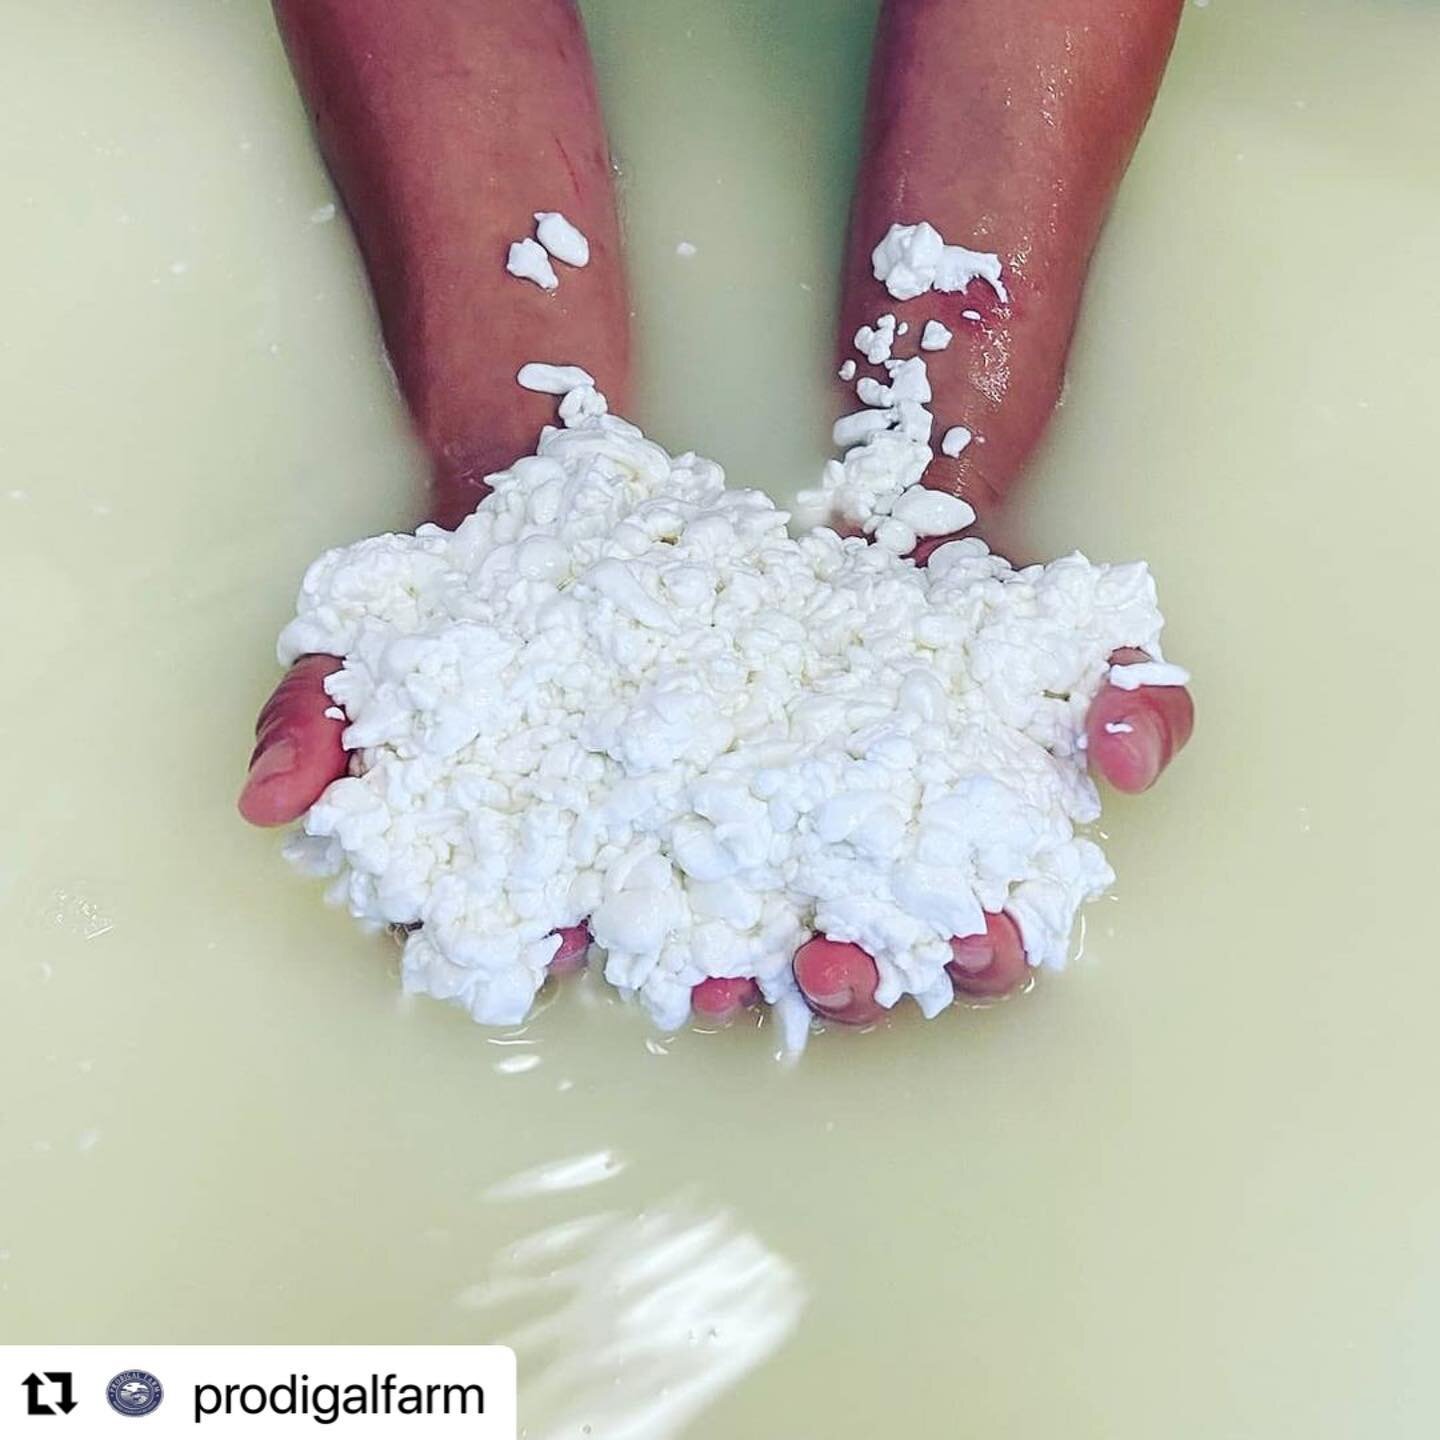 😍😍😍

#Repost @prodigalfarm with @make_repost
・・・
Handmade cheese ... before and after.  Milk with a date with destiny! 

Come get some of this deliciousness today before noon at the @southdurhamfarmersmarket and @chfarmersmarket 

You'll find a hu